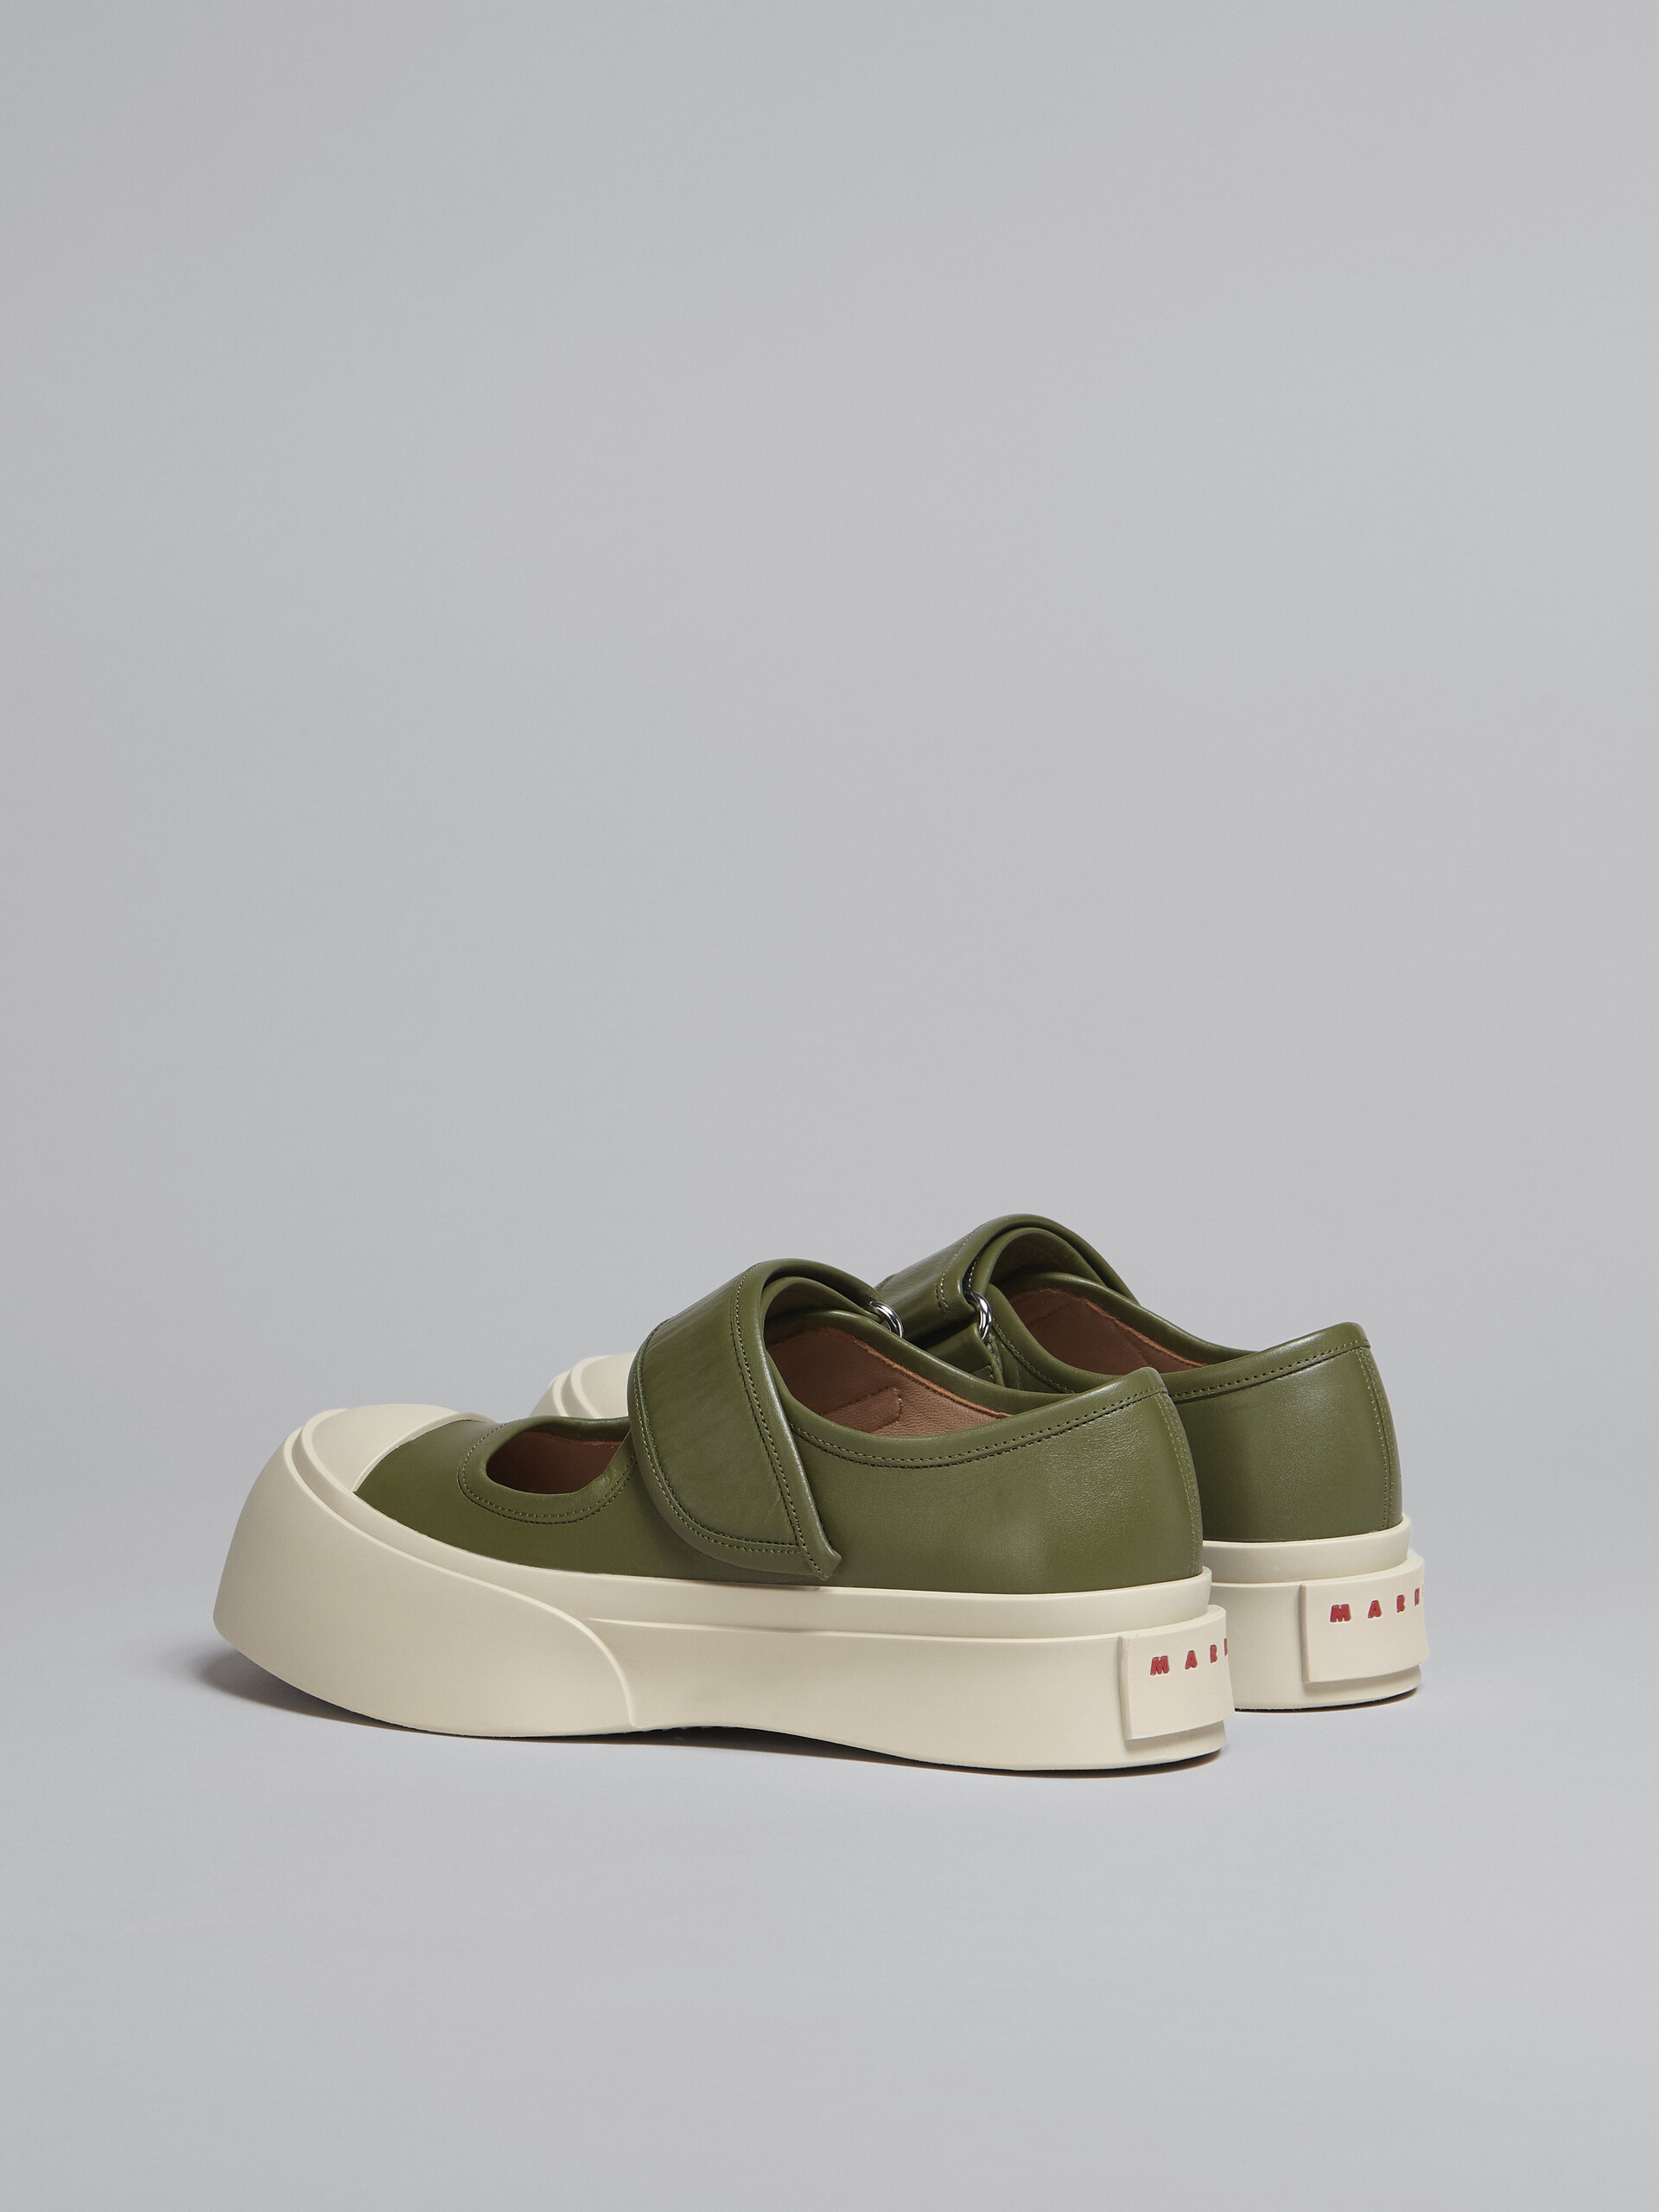 Green nappa leather PABLO Mary-Jane sneaker - Sneakers - Image 3